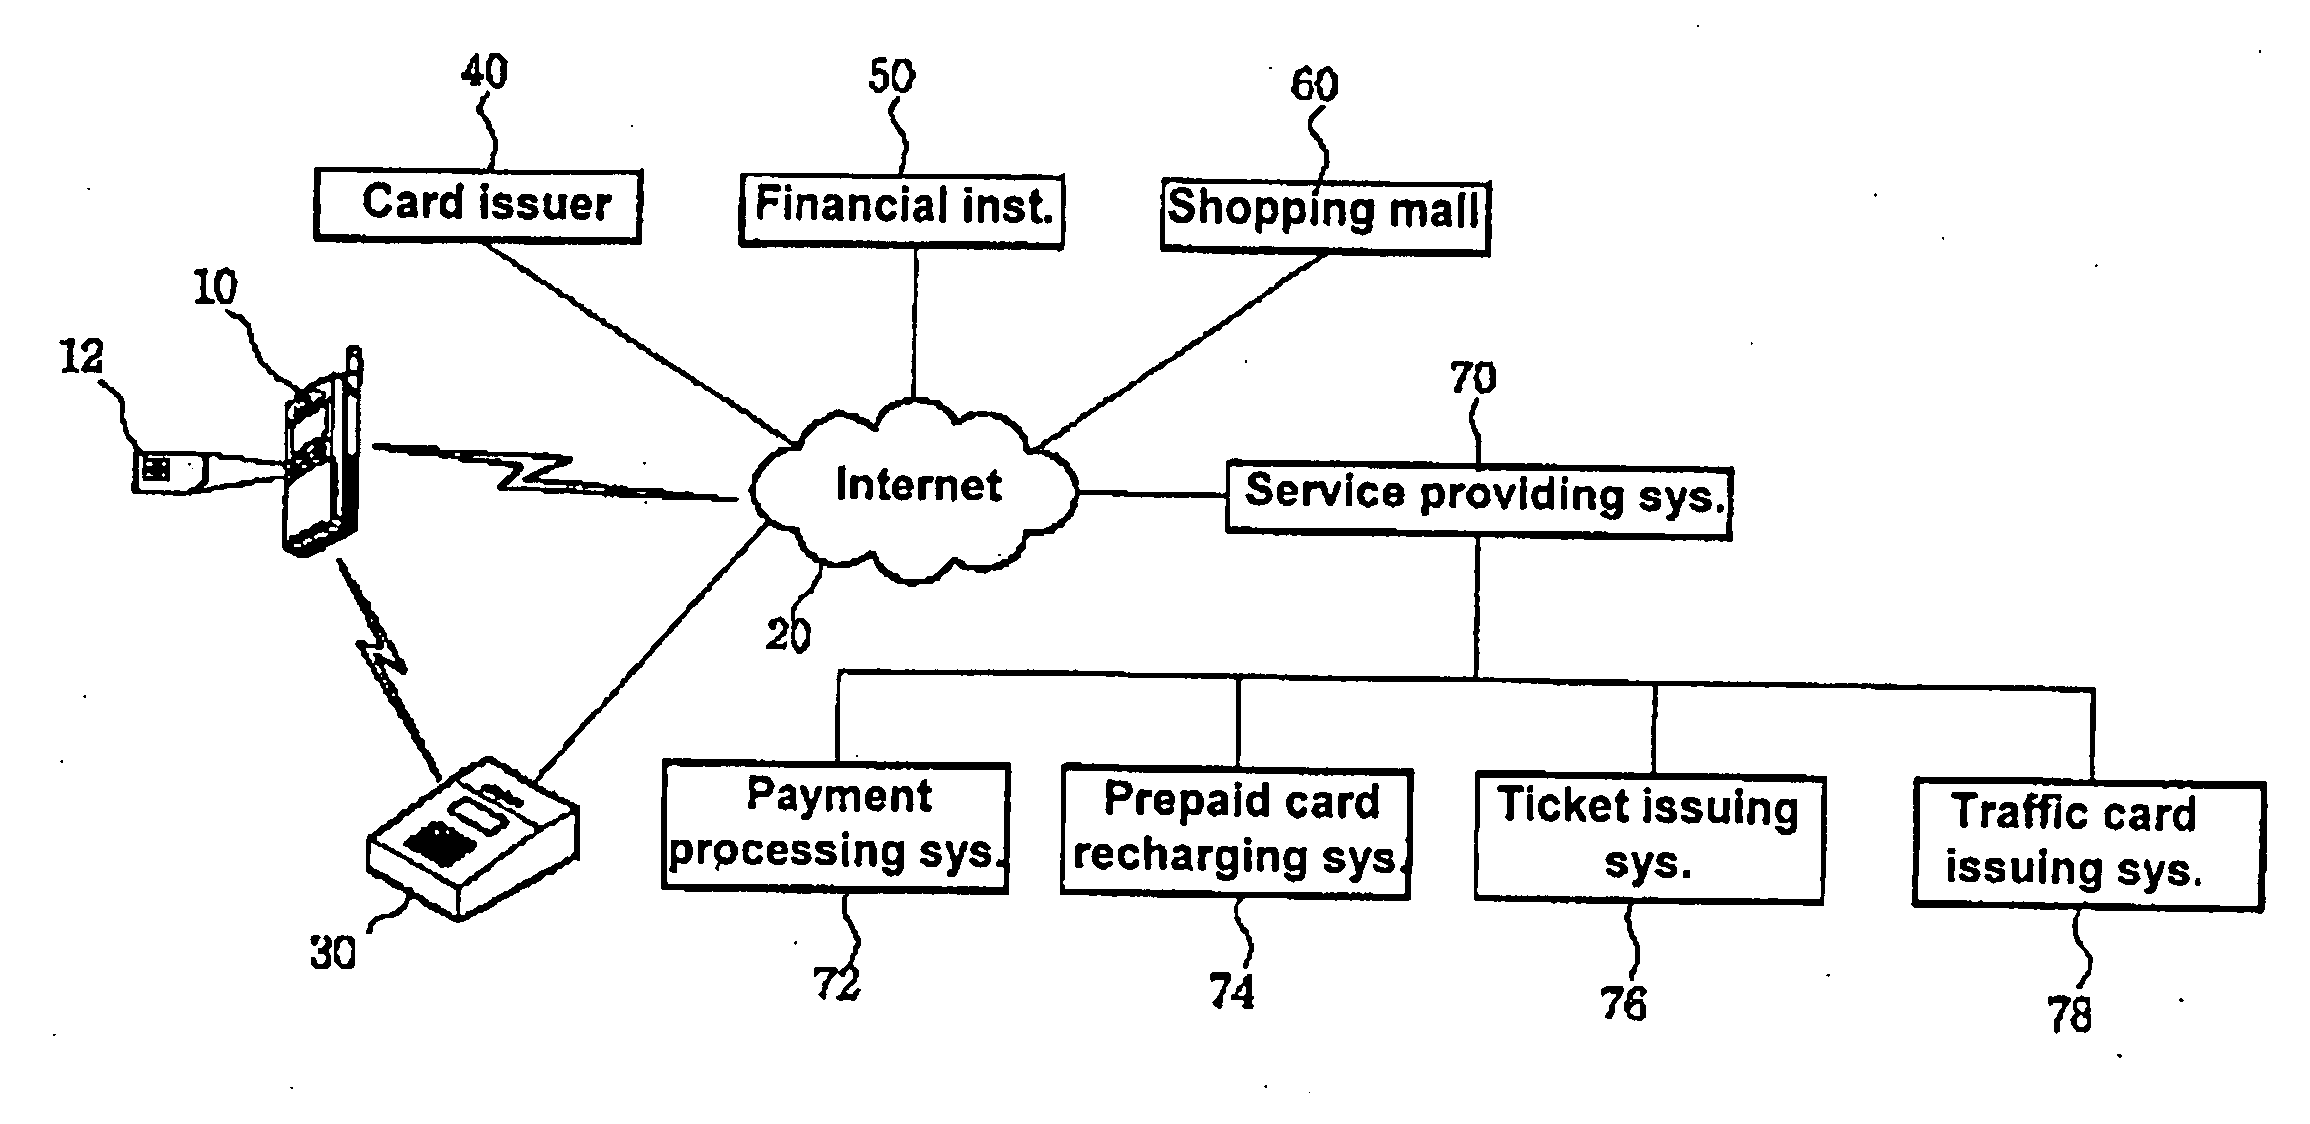 Mobile terminal with user identification card including personal finance-related information and method of using a value-added mobile service through said mobile terminal